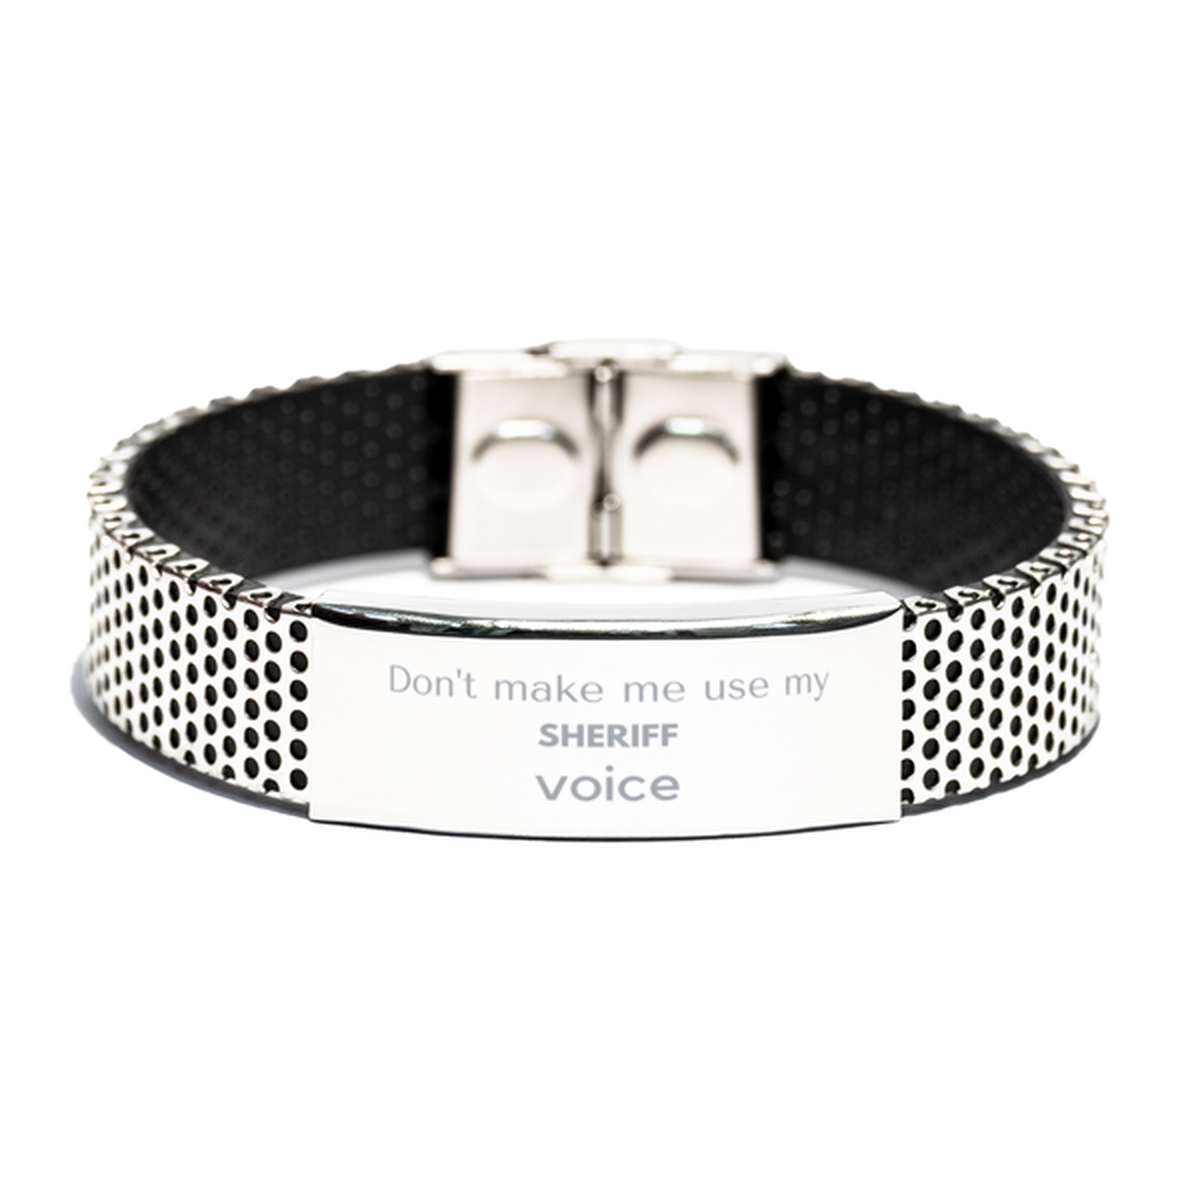 Don't make me use my Sheriff voice, Sarcasm Sheriff Gifts, Christmas Sheriff Stainless Steel Bracelet Birthday Unique Gifts For Sheriff Coworkers, Men, Women, Colleague, Friends